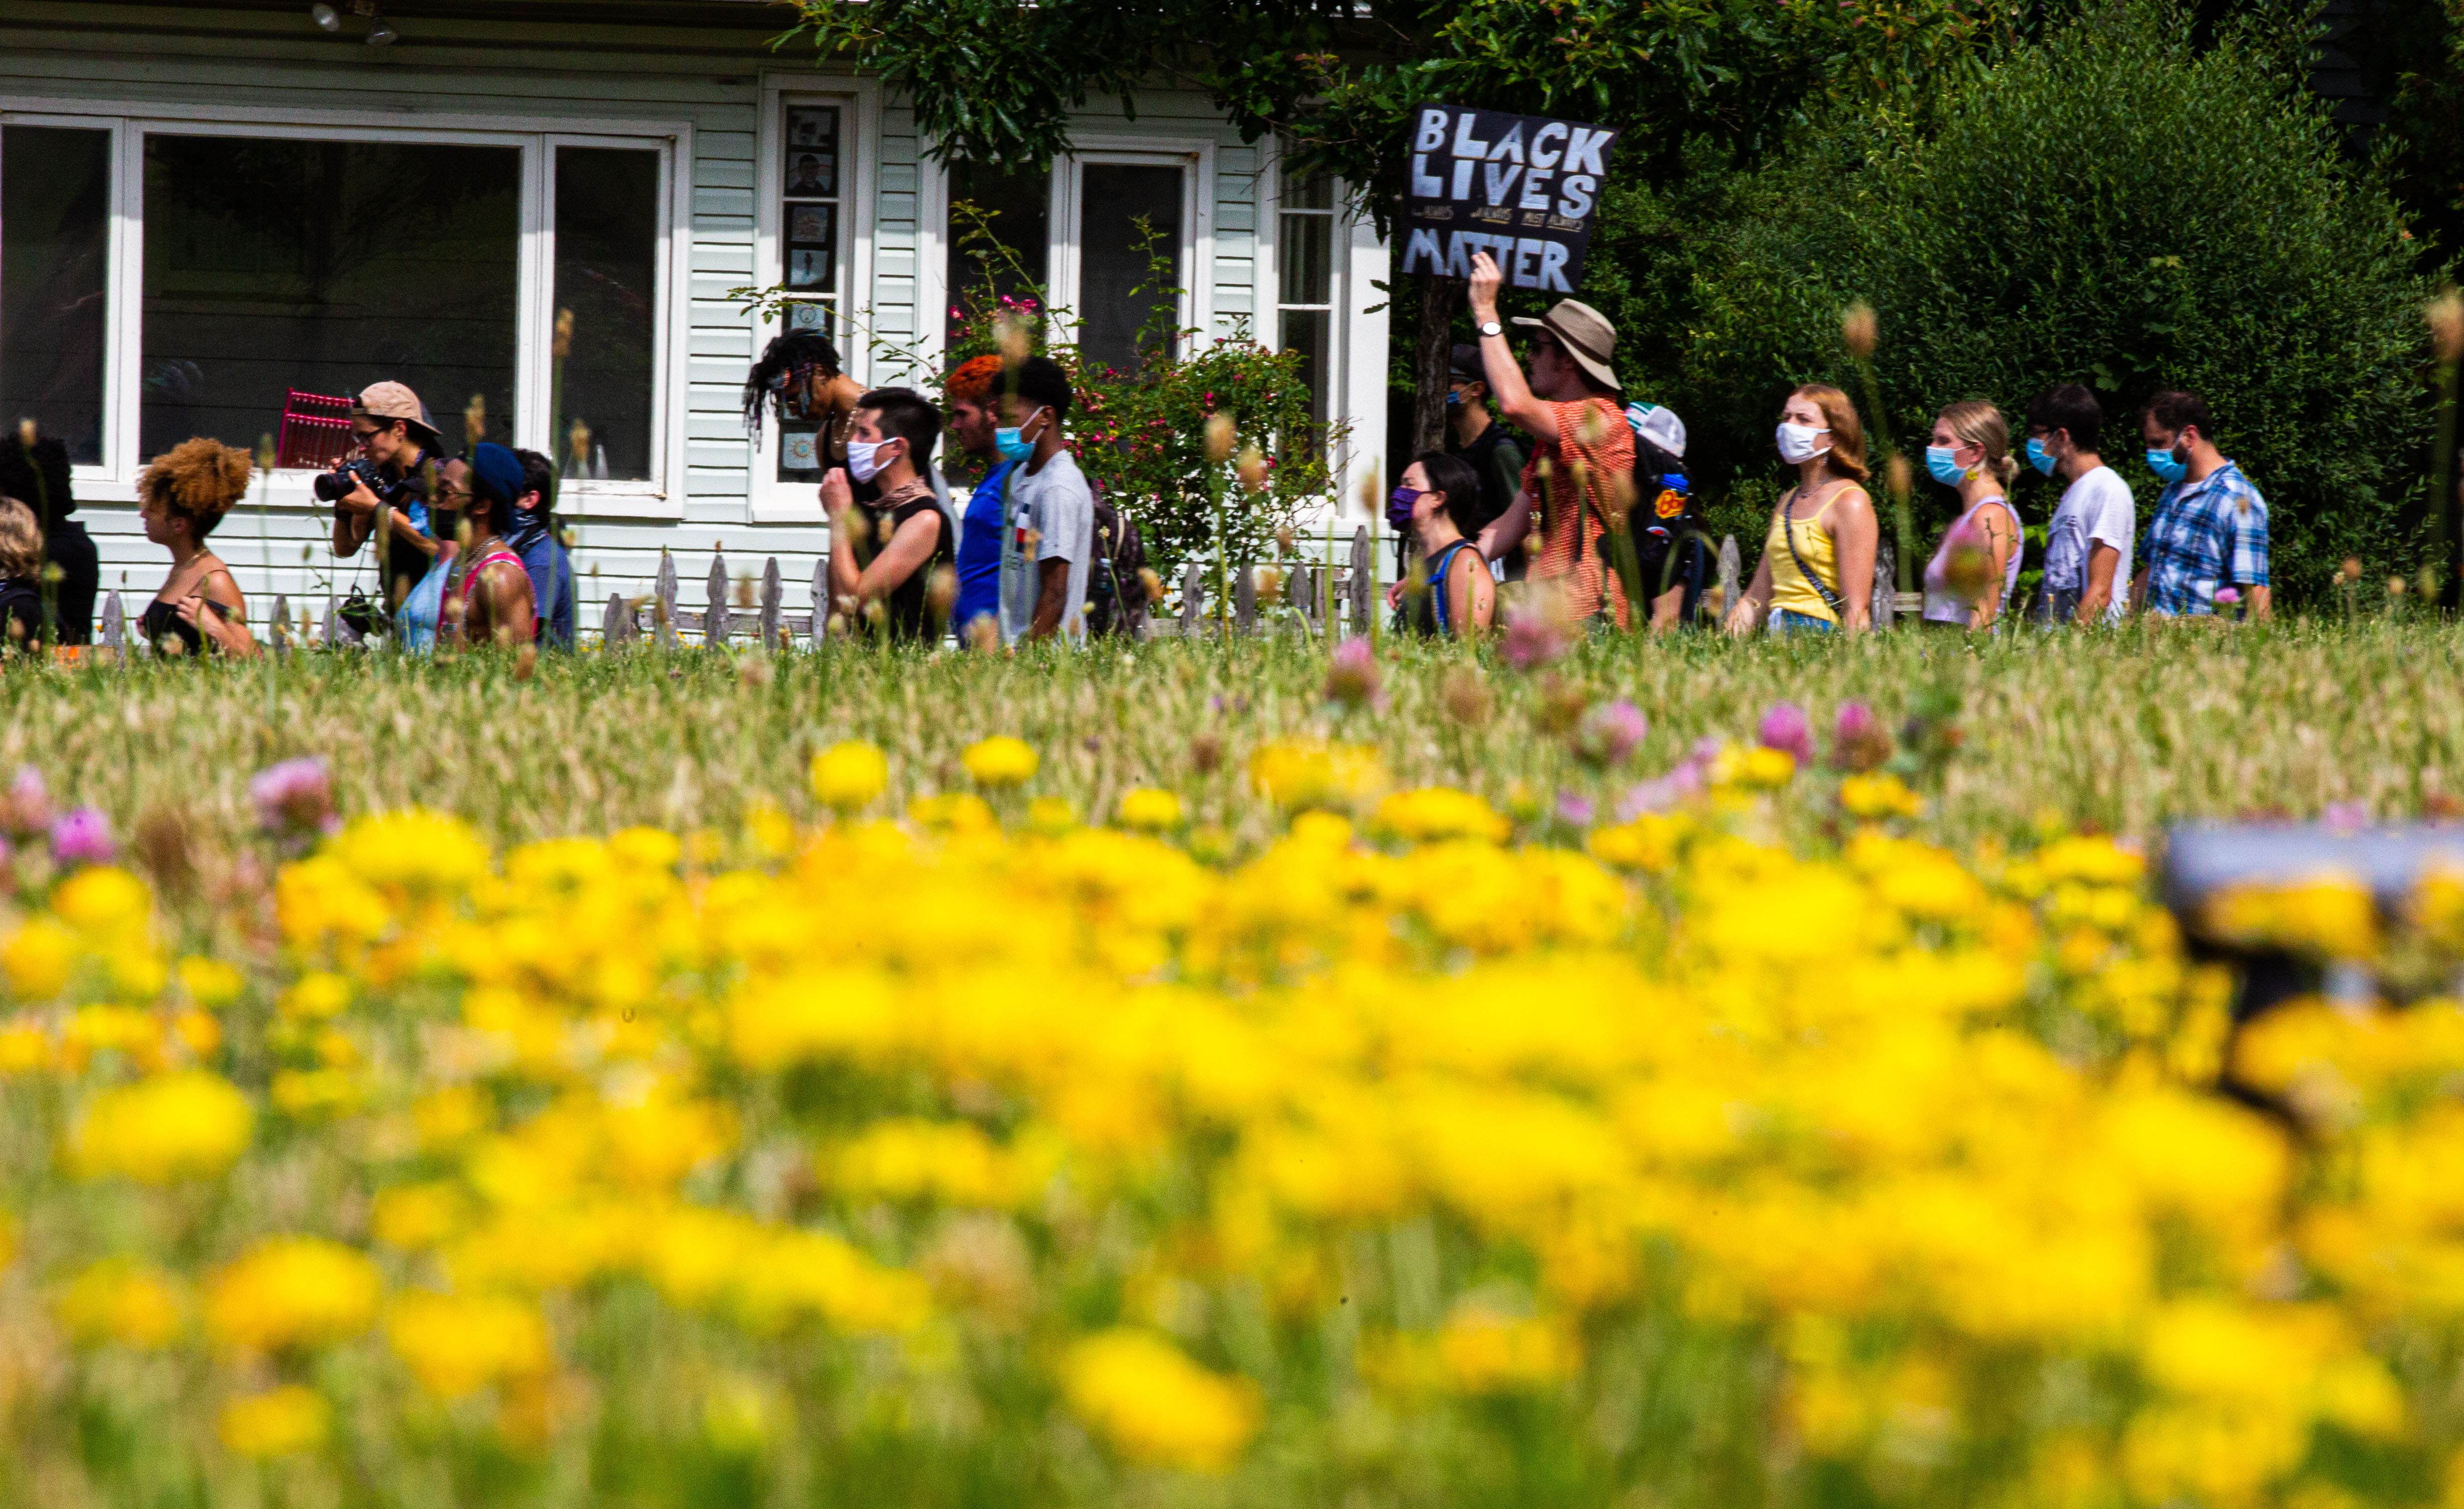 Demonstrators marched Friday, July 10, 2020, which marched them into Strathmore neighborhood to Mayor Ben Walsh's home. In all, demonstrators have marched more than 124 miles over the 40-plus days to protest against police brutality in the wake of the death of George Floyd.